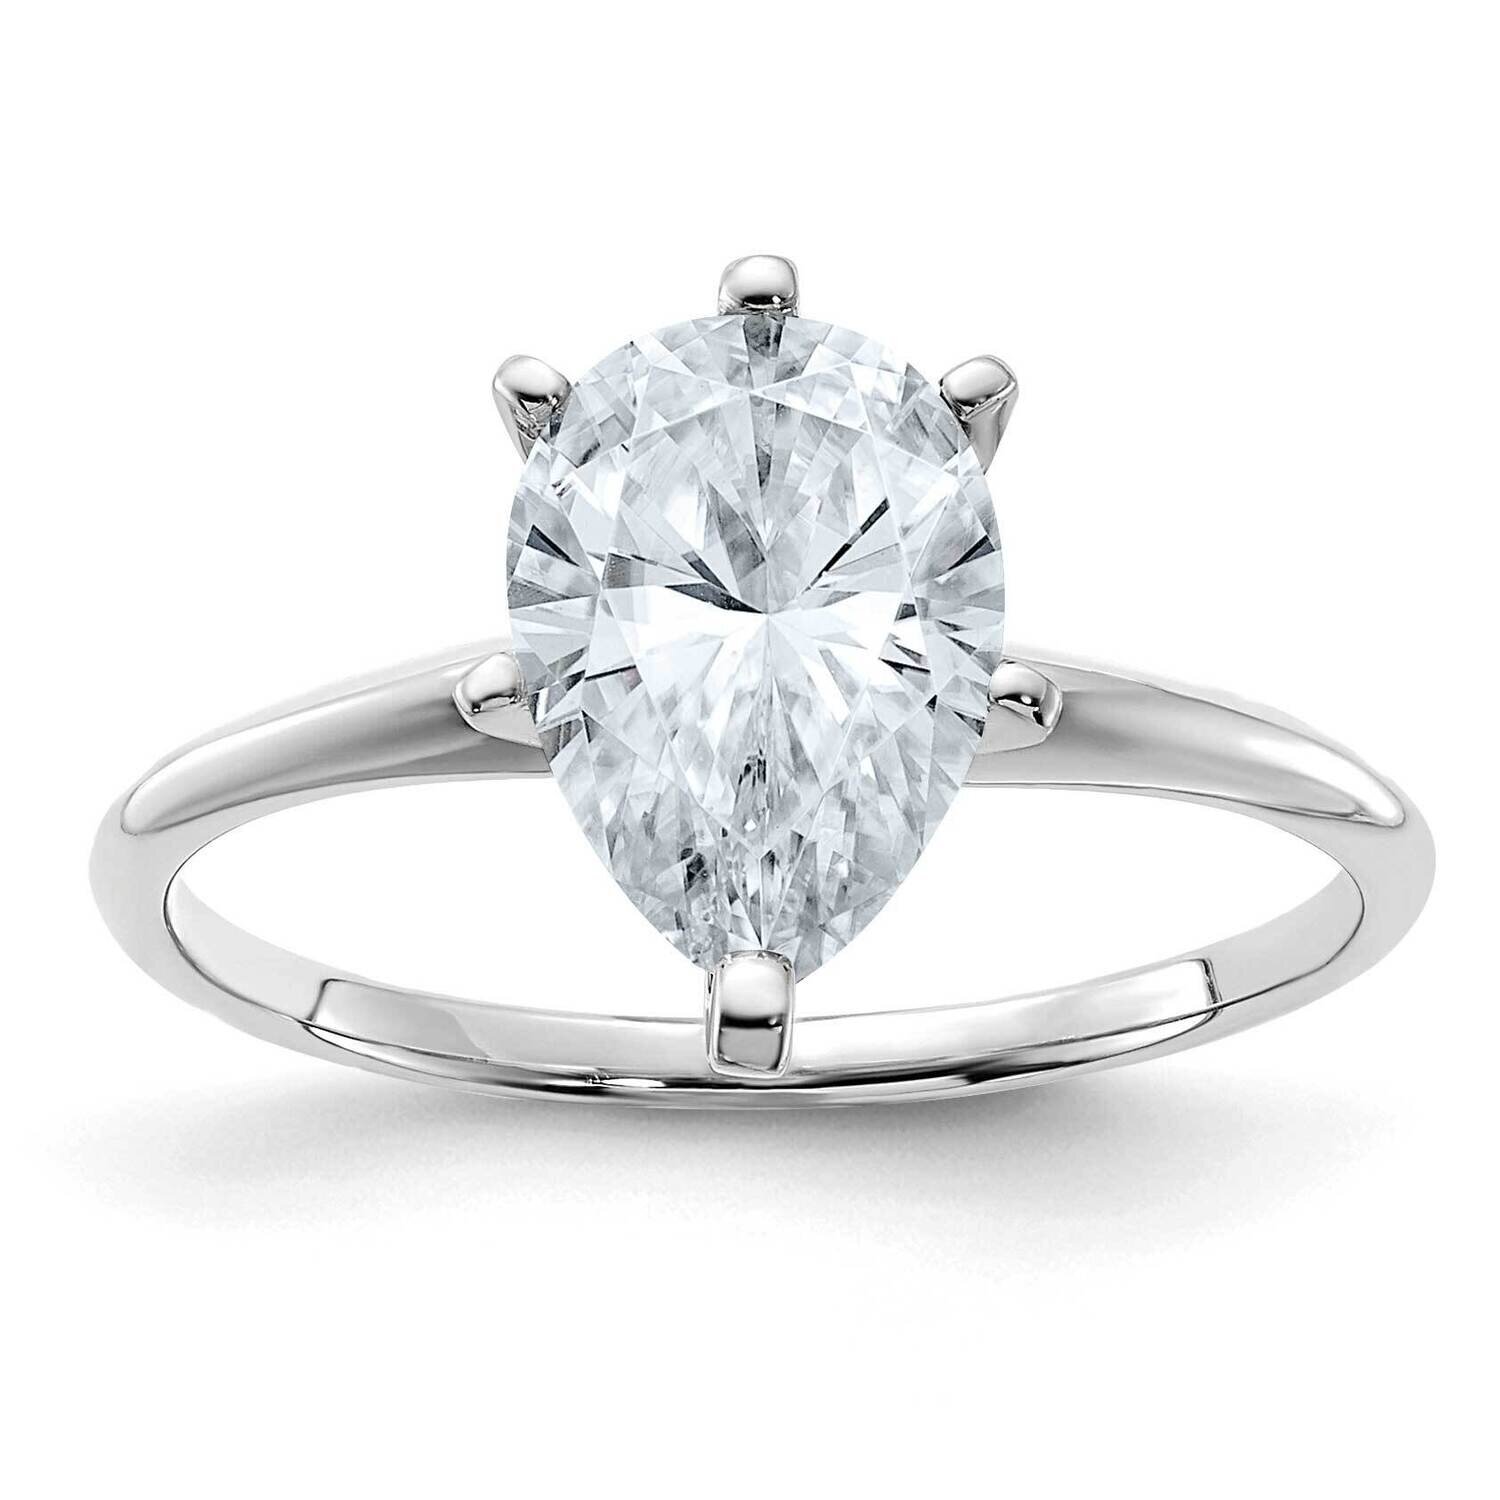 2ct. D E F Pure Light Pear Moissanite Solitaire Ring 14k White Gold WGSH15A-15MP-6